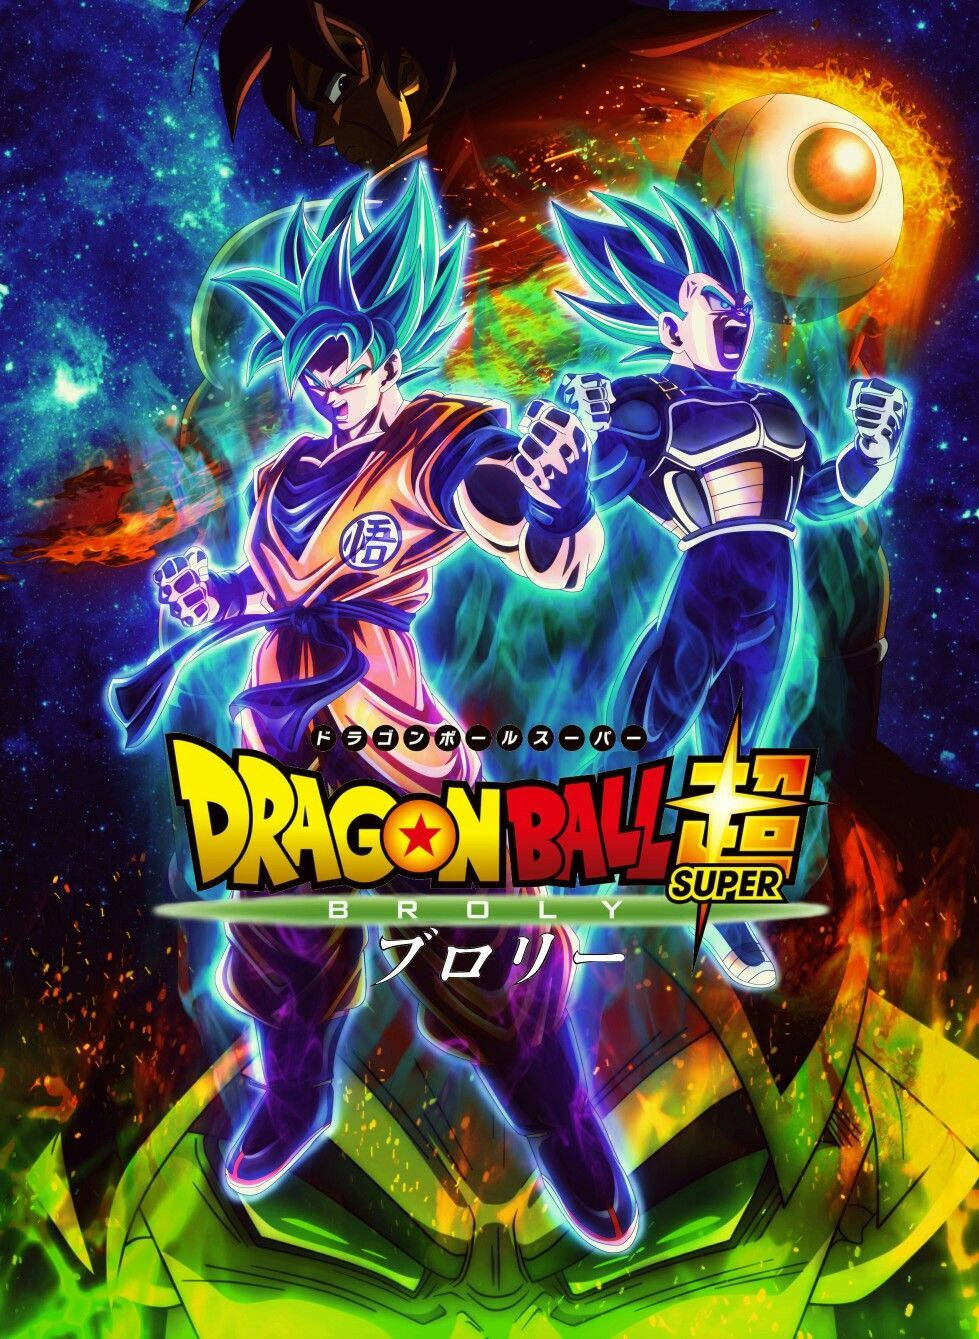 "Goku and Broly face off in the epic battle of Dragon Ball Super: Broly!" Wallpaper